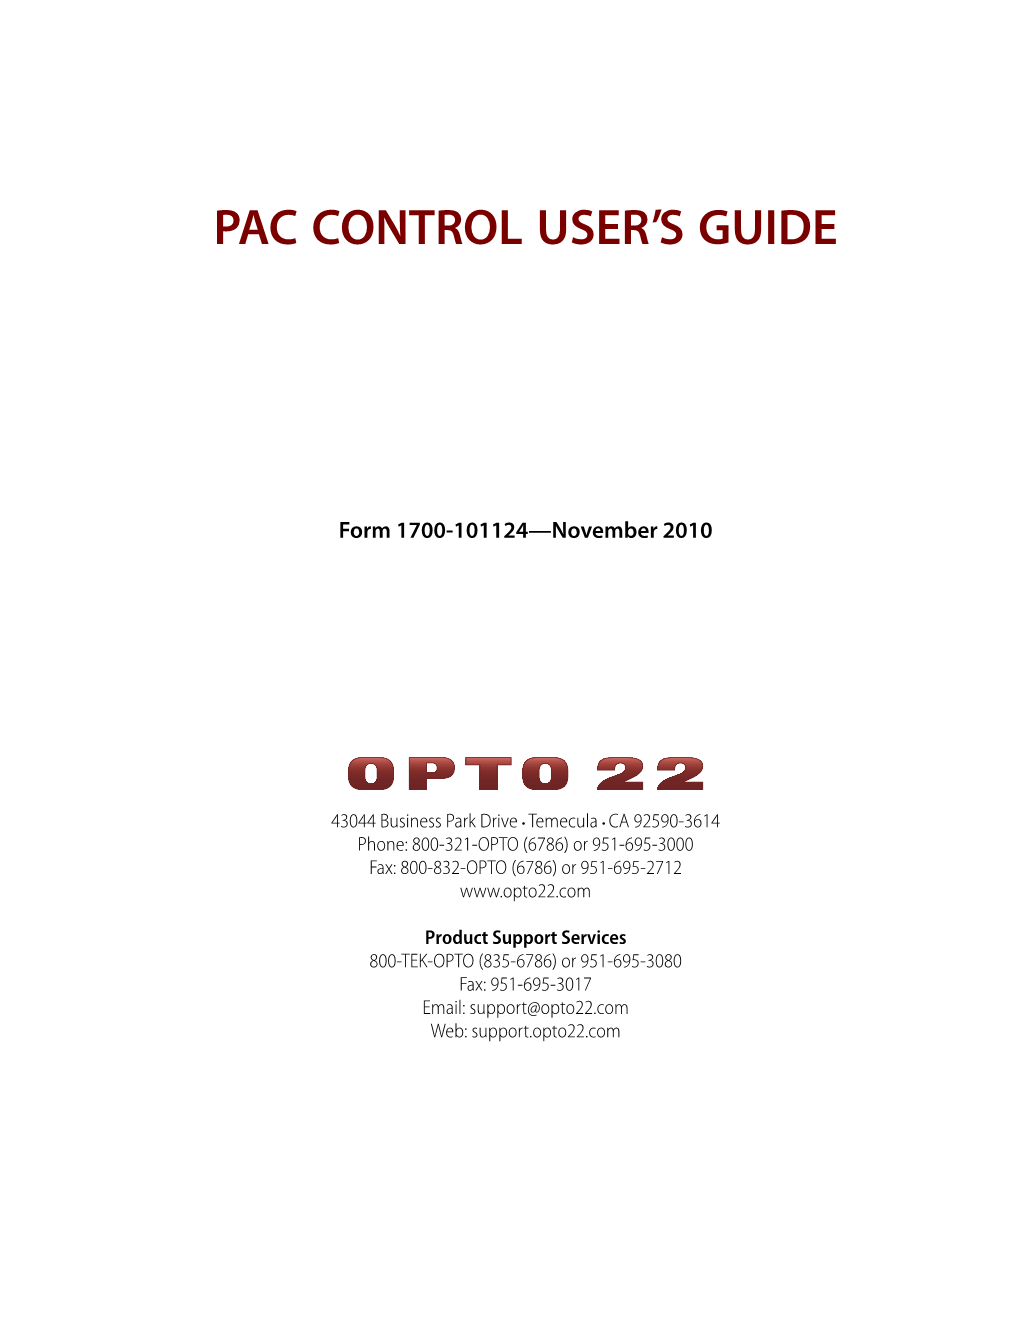 Pac Control User's Guide